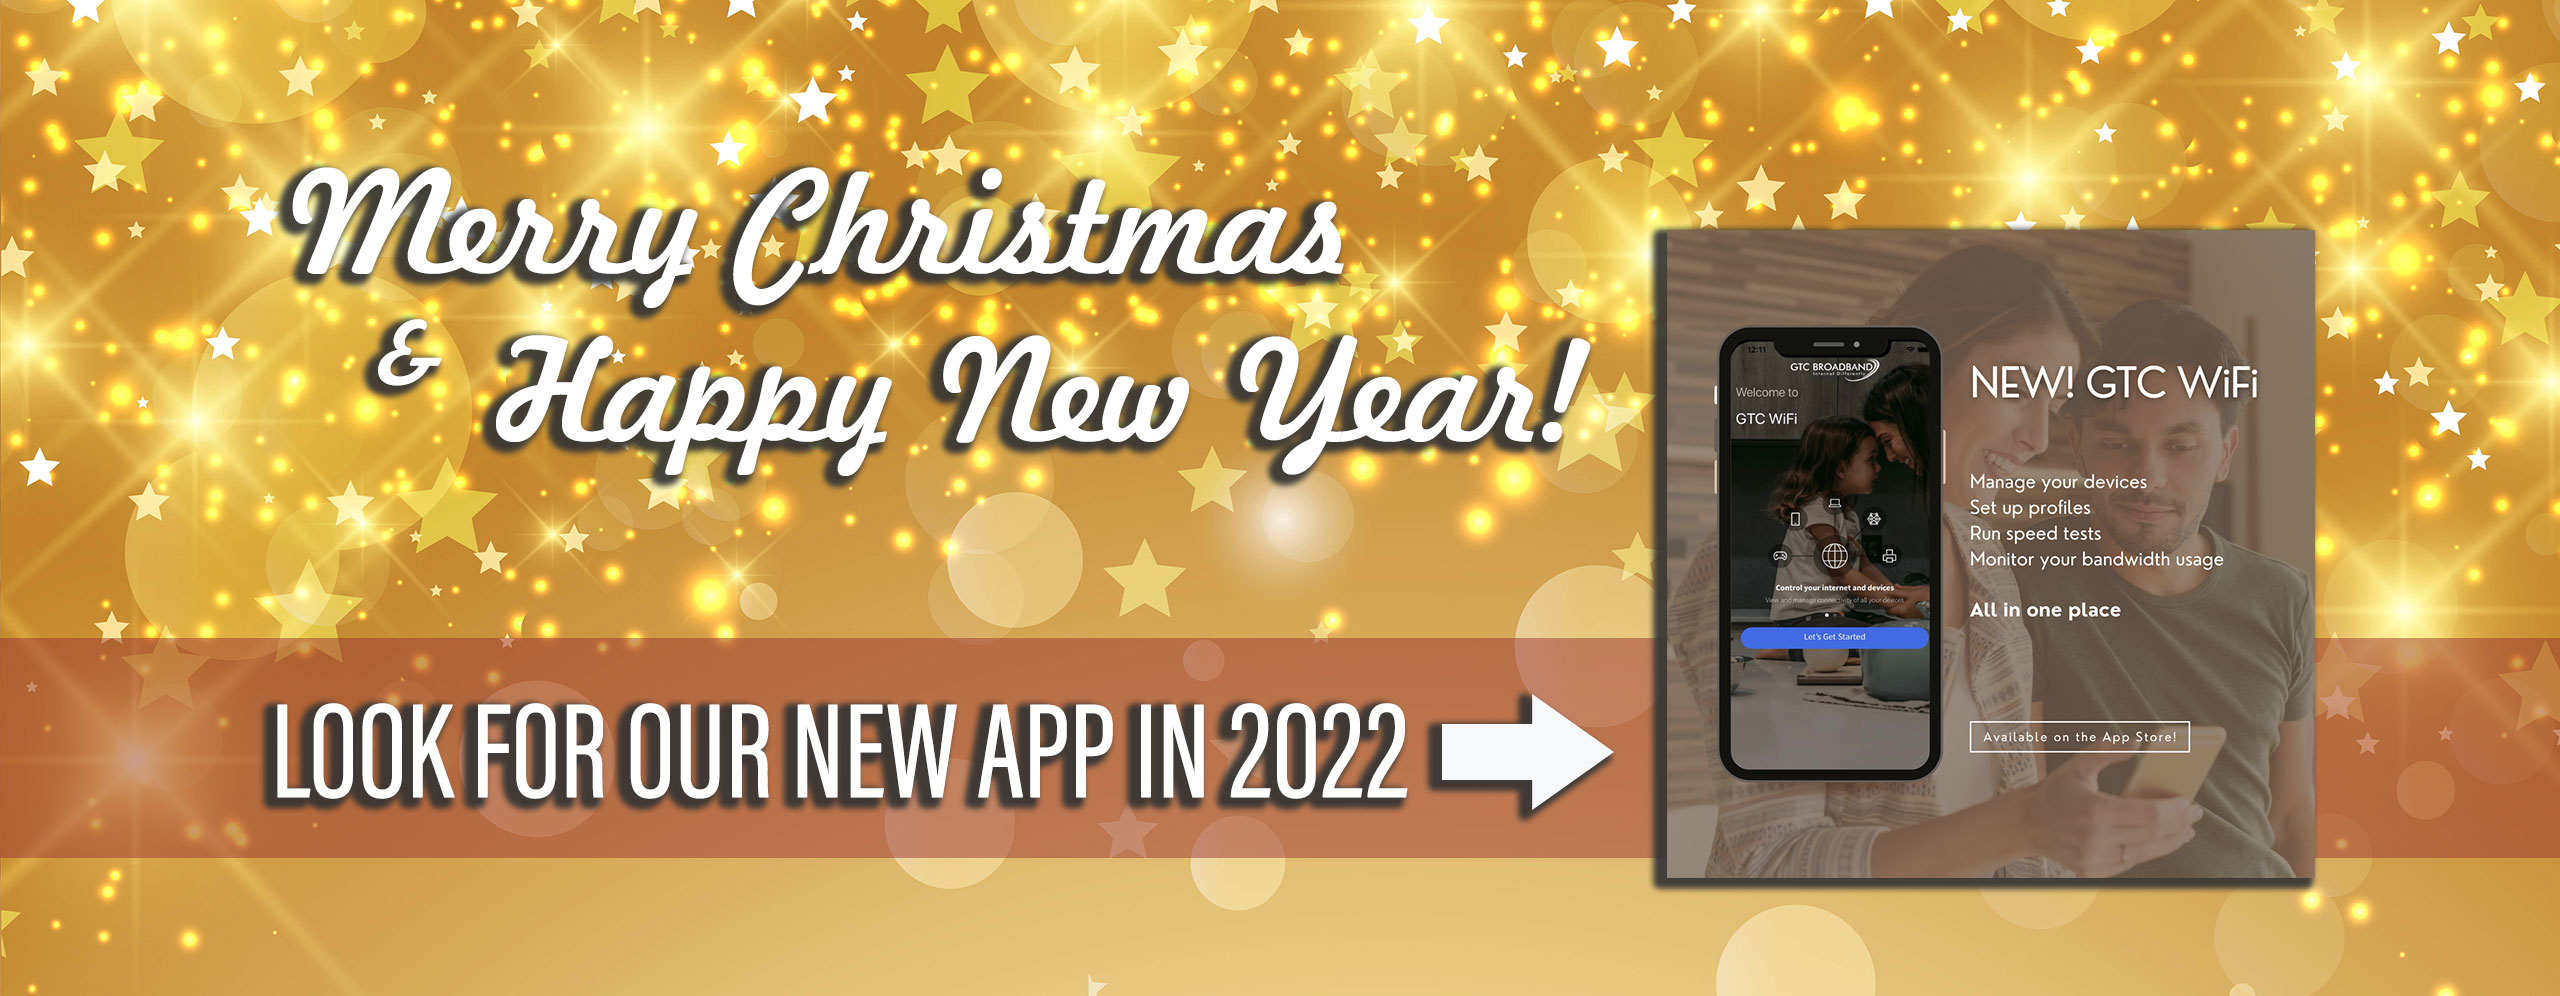 Happy Holidays and check out our new app in 2022